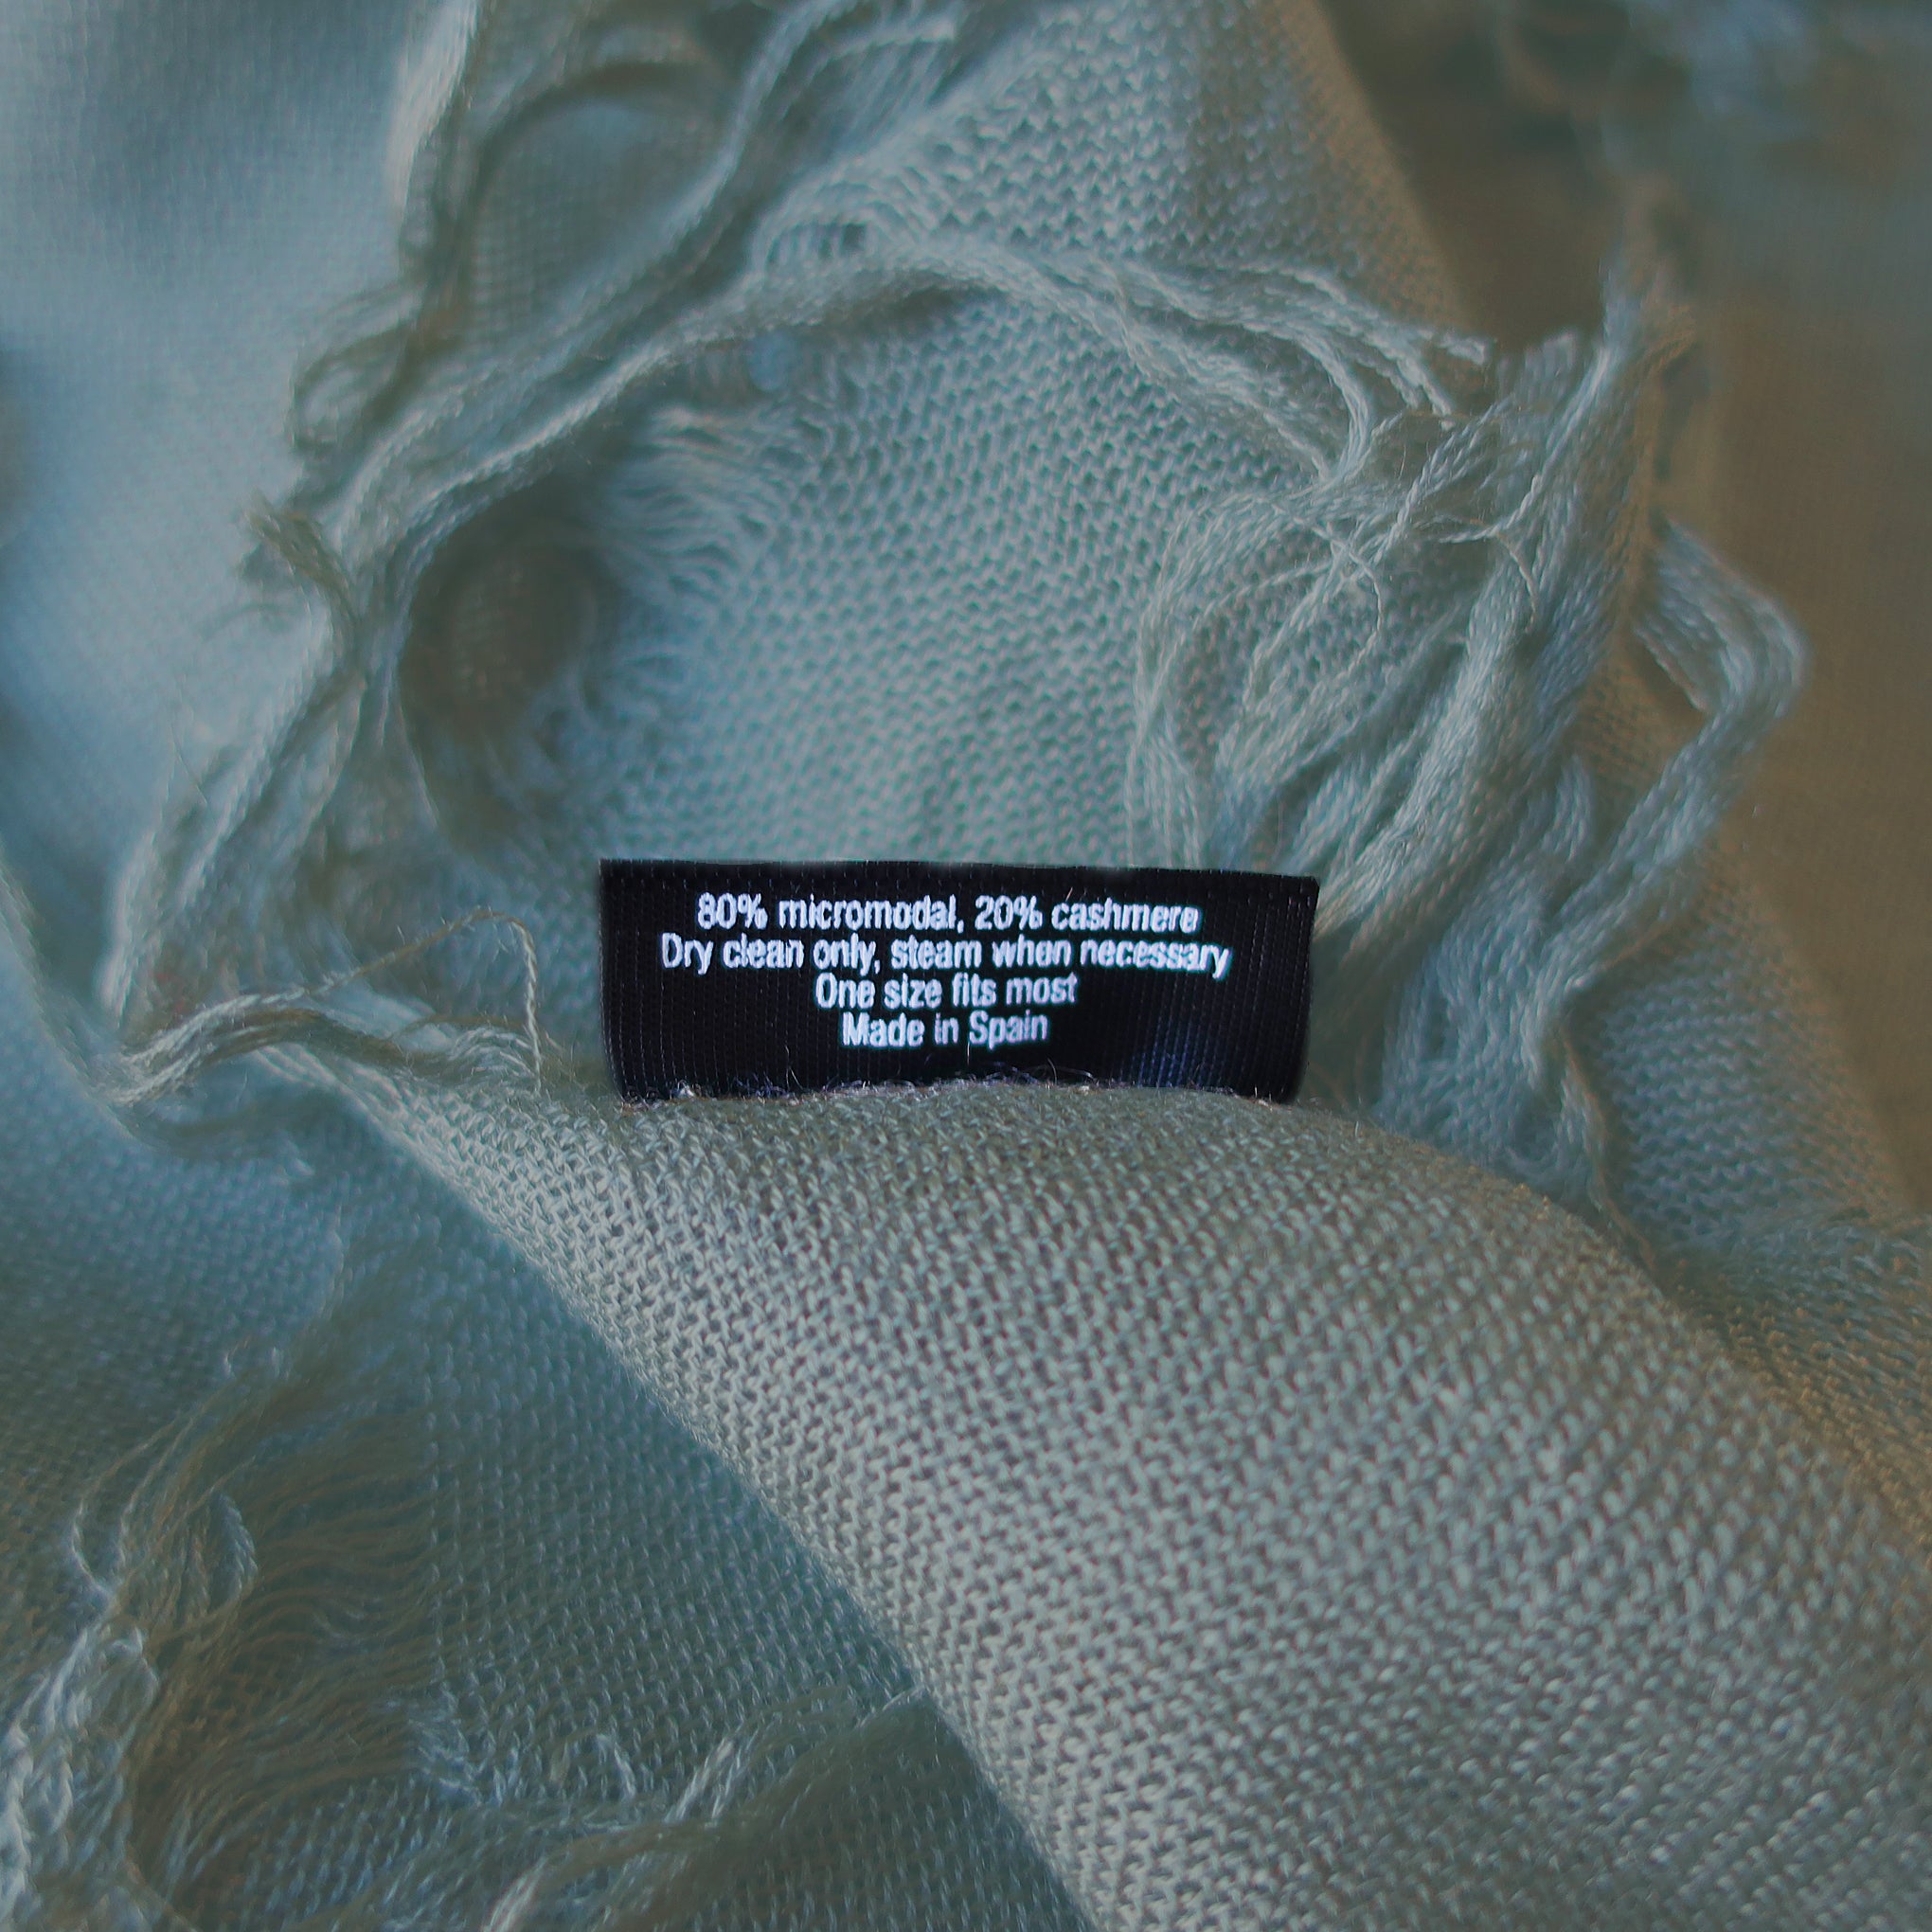 Blue Pacific Tissue Solid Modal and Cashmere Scarf Shawl in Shadow Sage